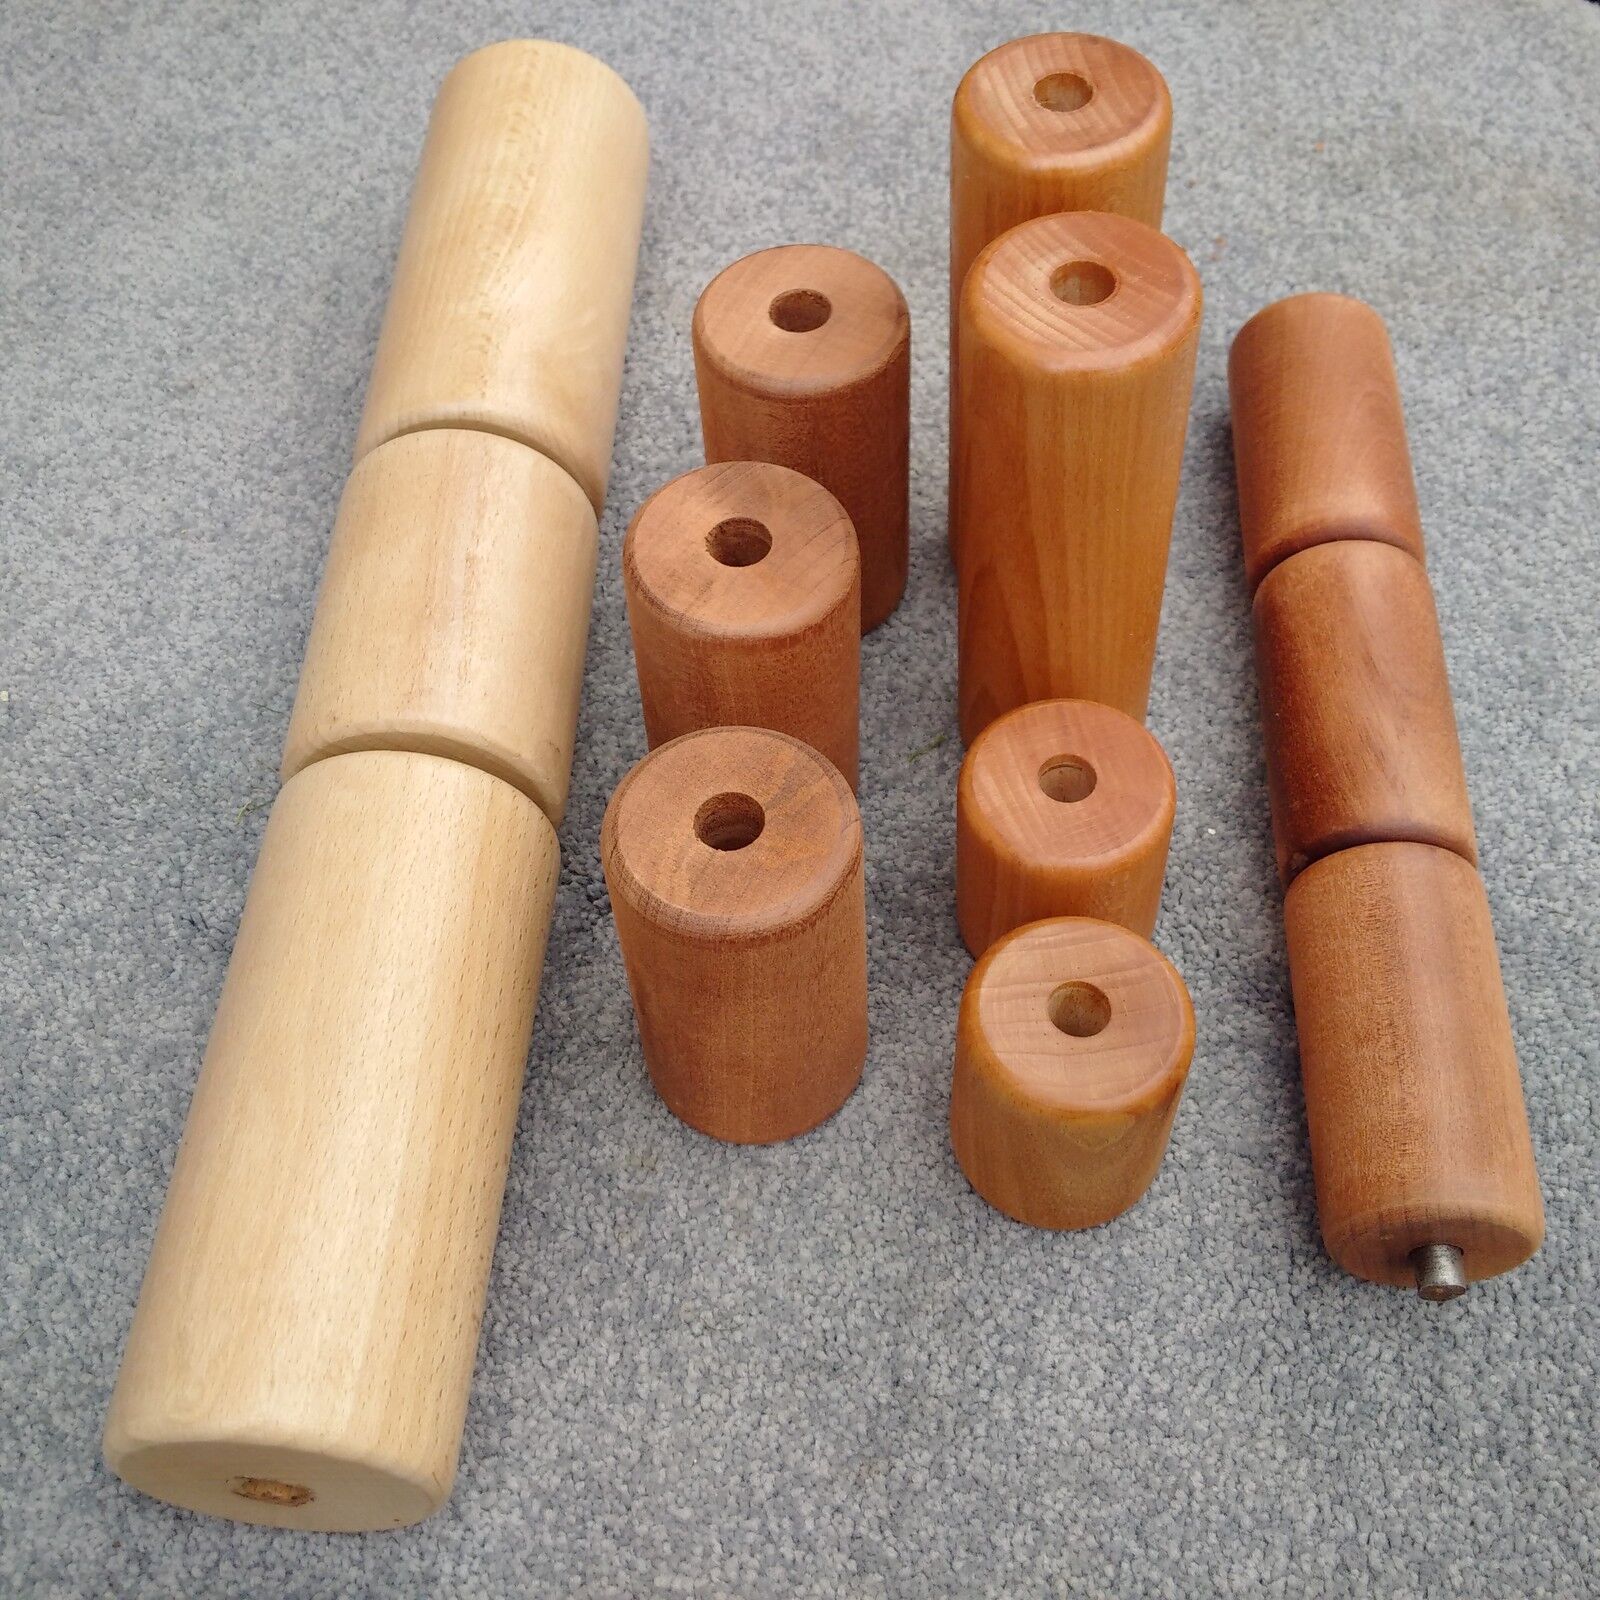 Qualcast/ Atco/ Ransome/Webb/JP Maxees/Honda Lawn Mower Wooden Rollers